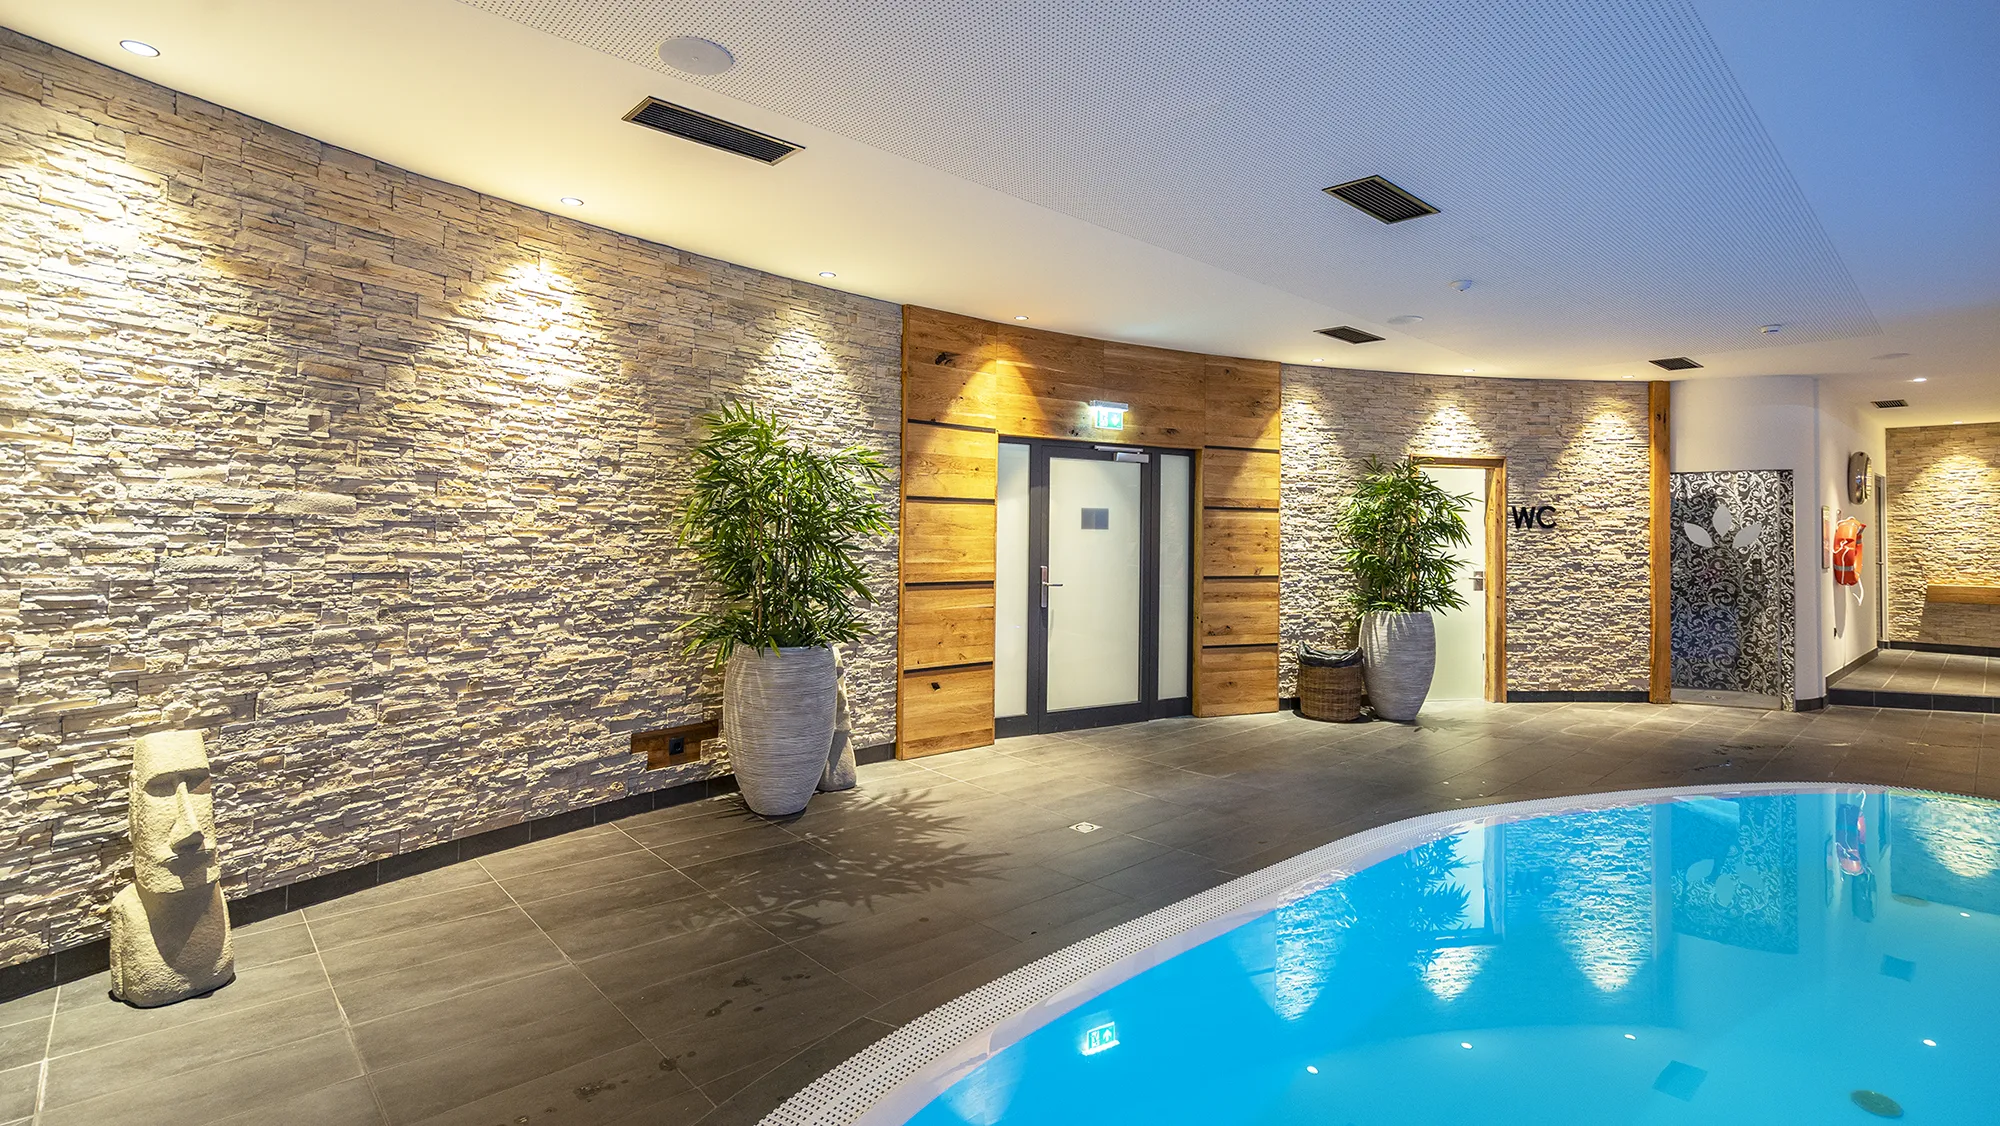 Stone veneer on the wall of a swimming pool area in a hotel